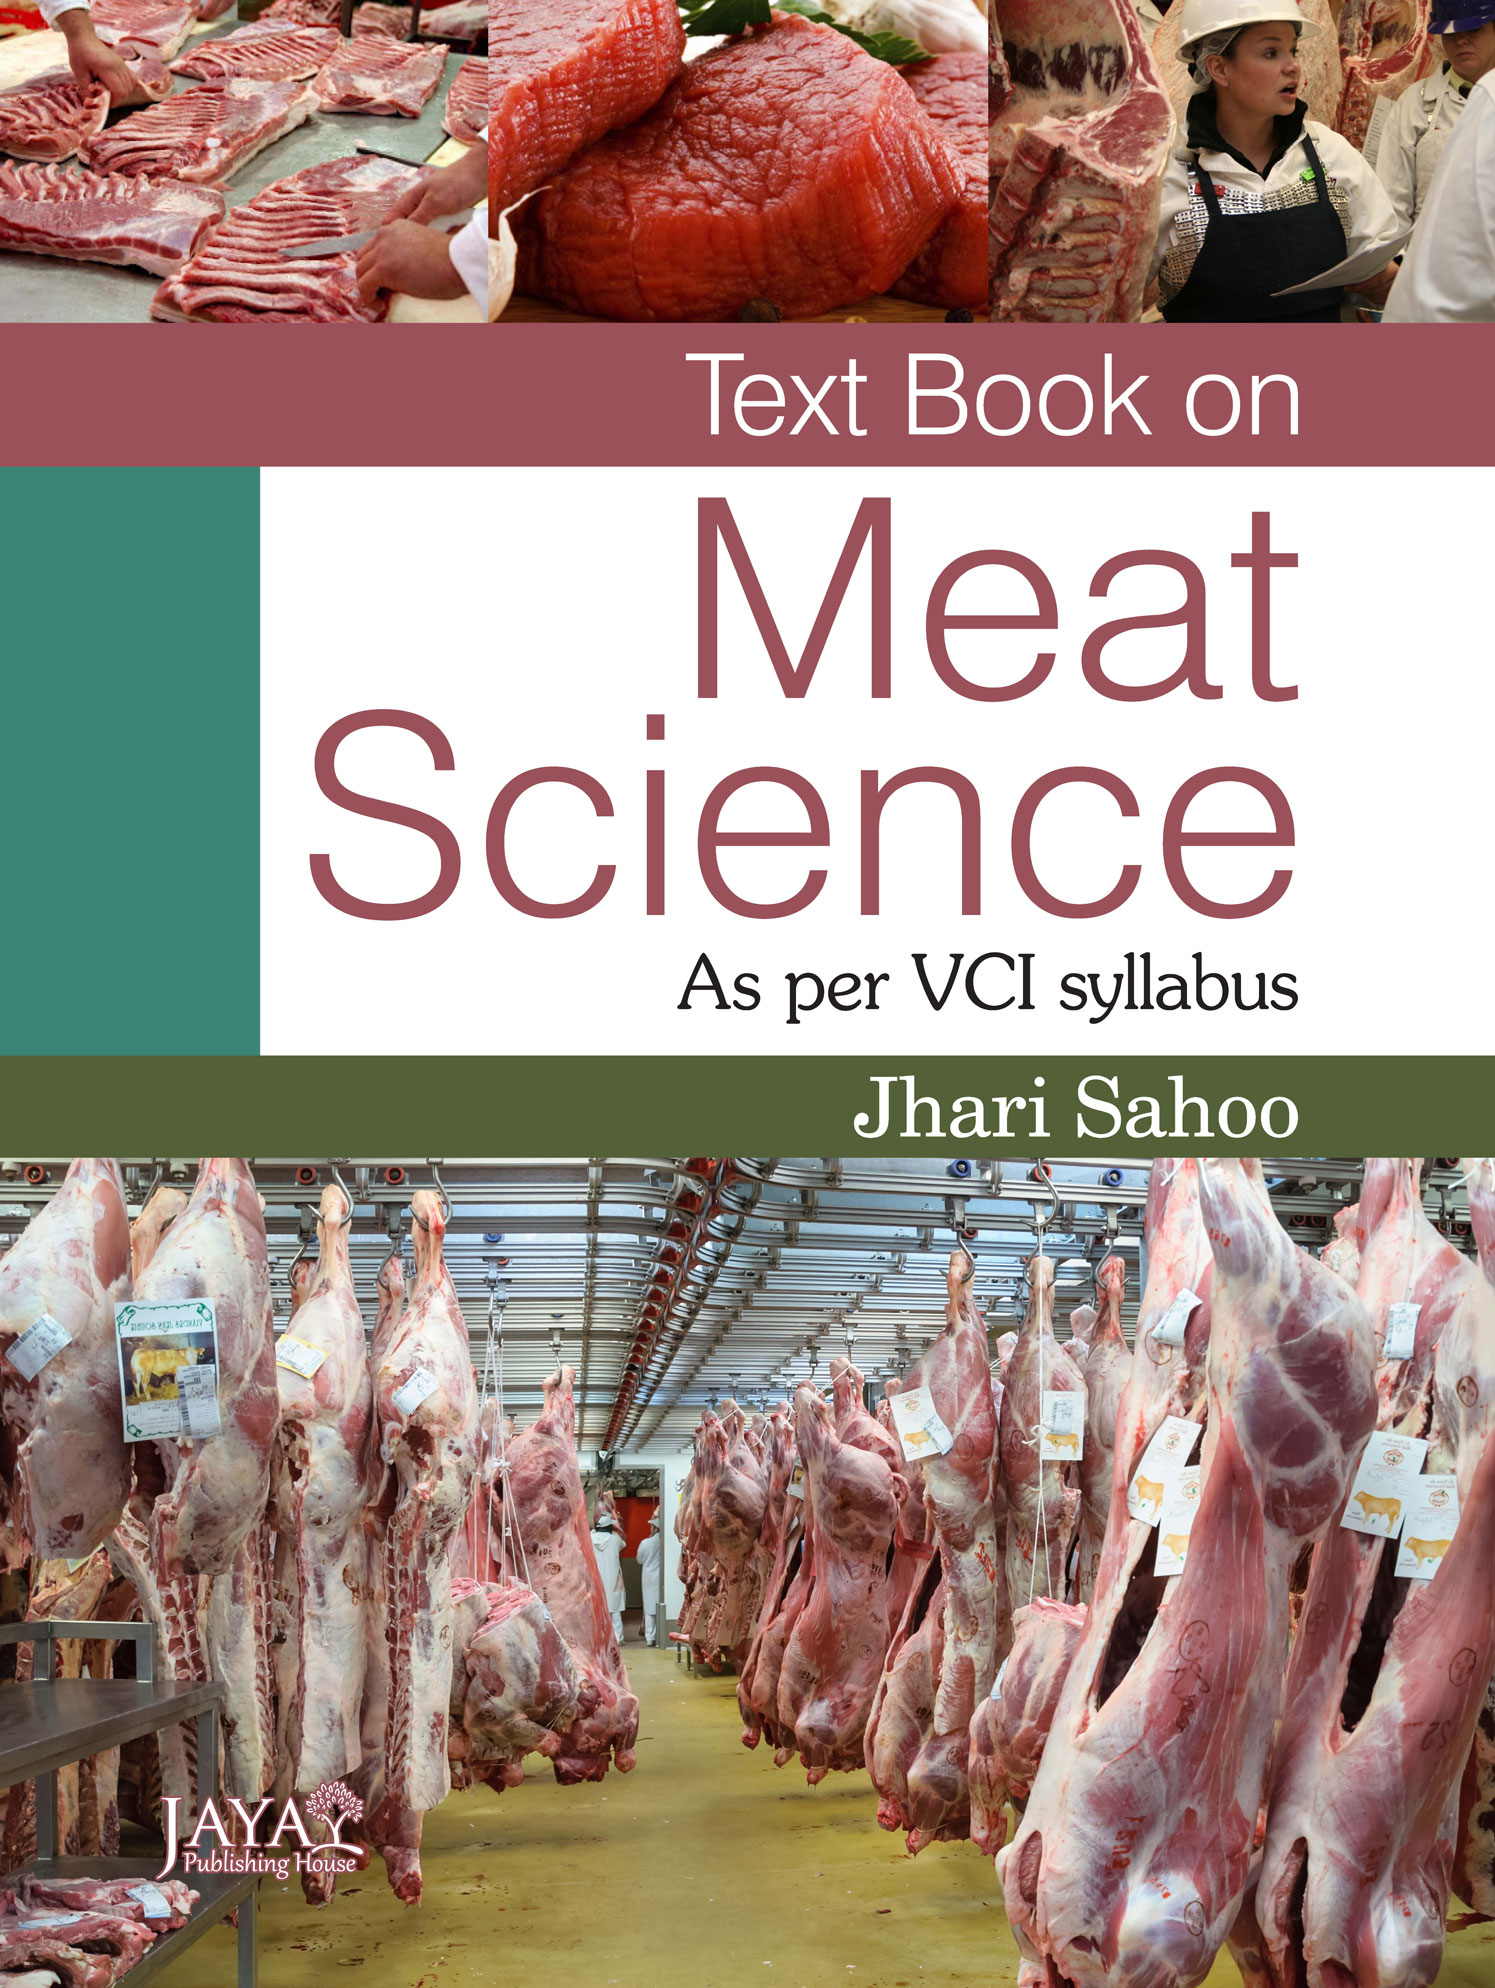 Text Book on Meat Science